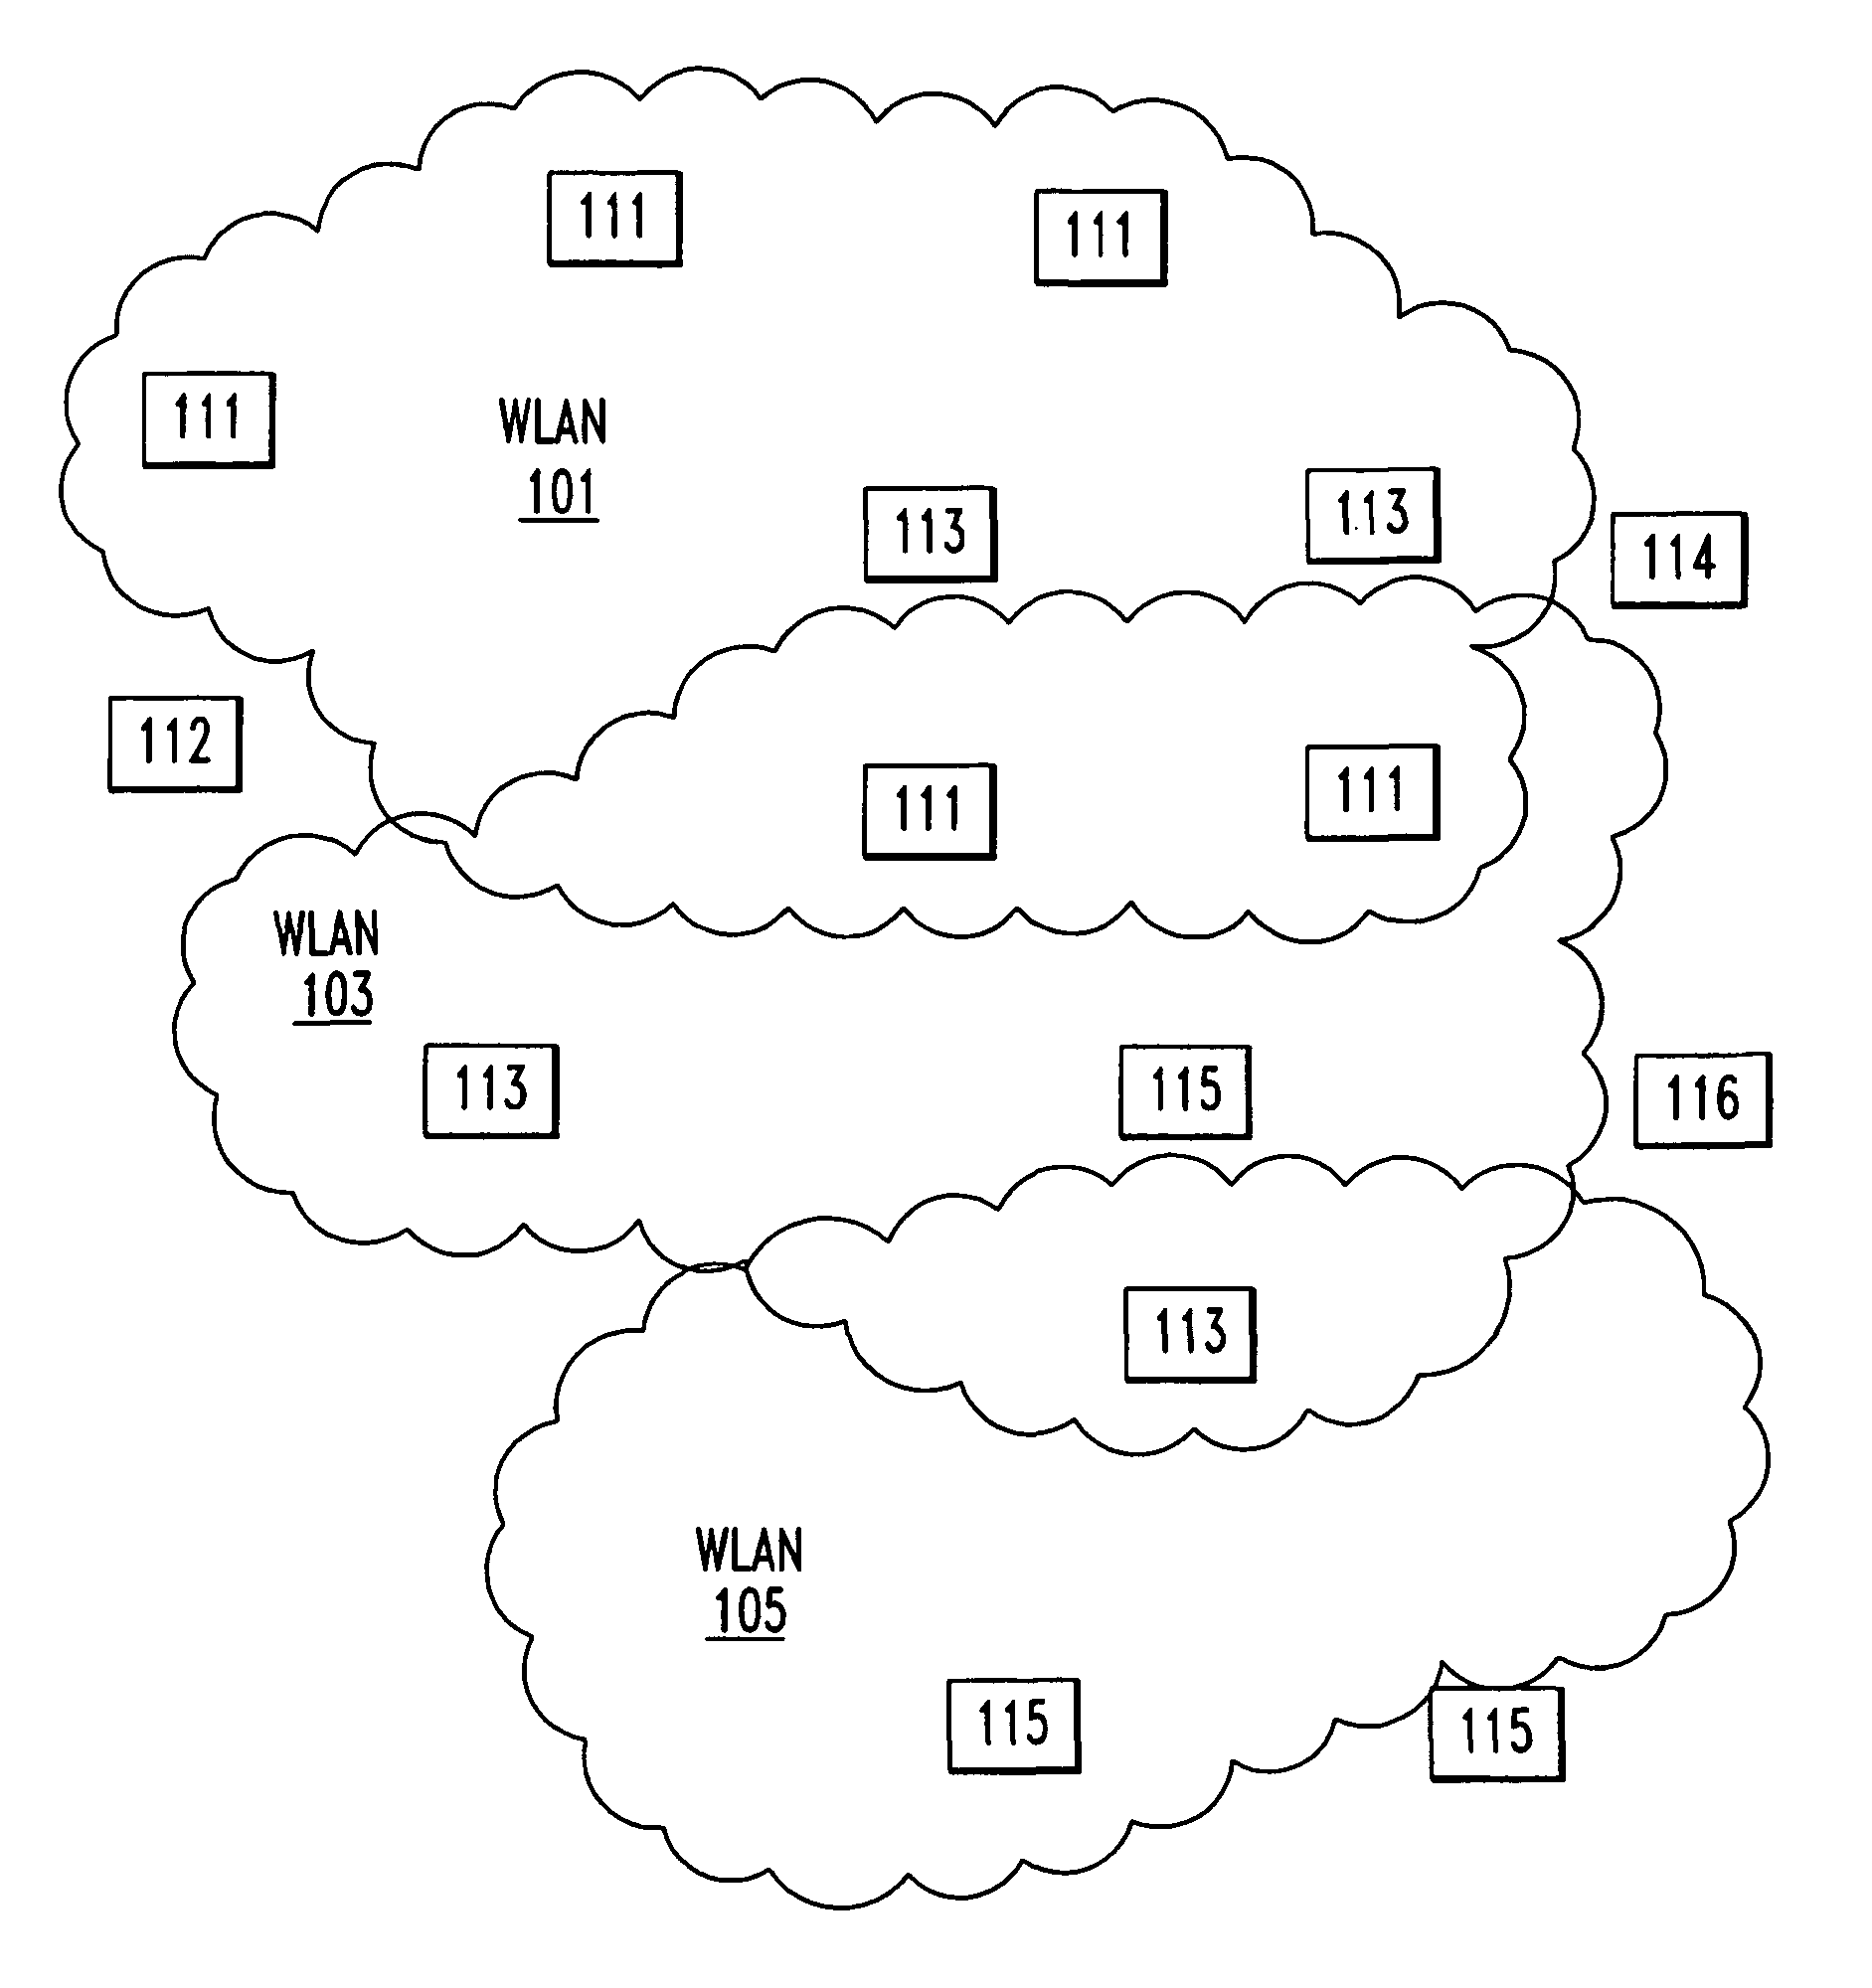 Method for enabling interoperability between data transmission systems conforming to IEEE 802.11 and HIPERLAN standards